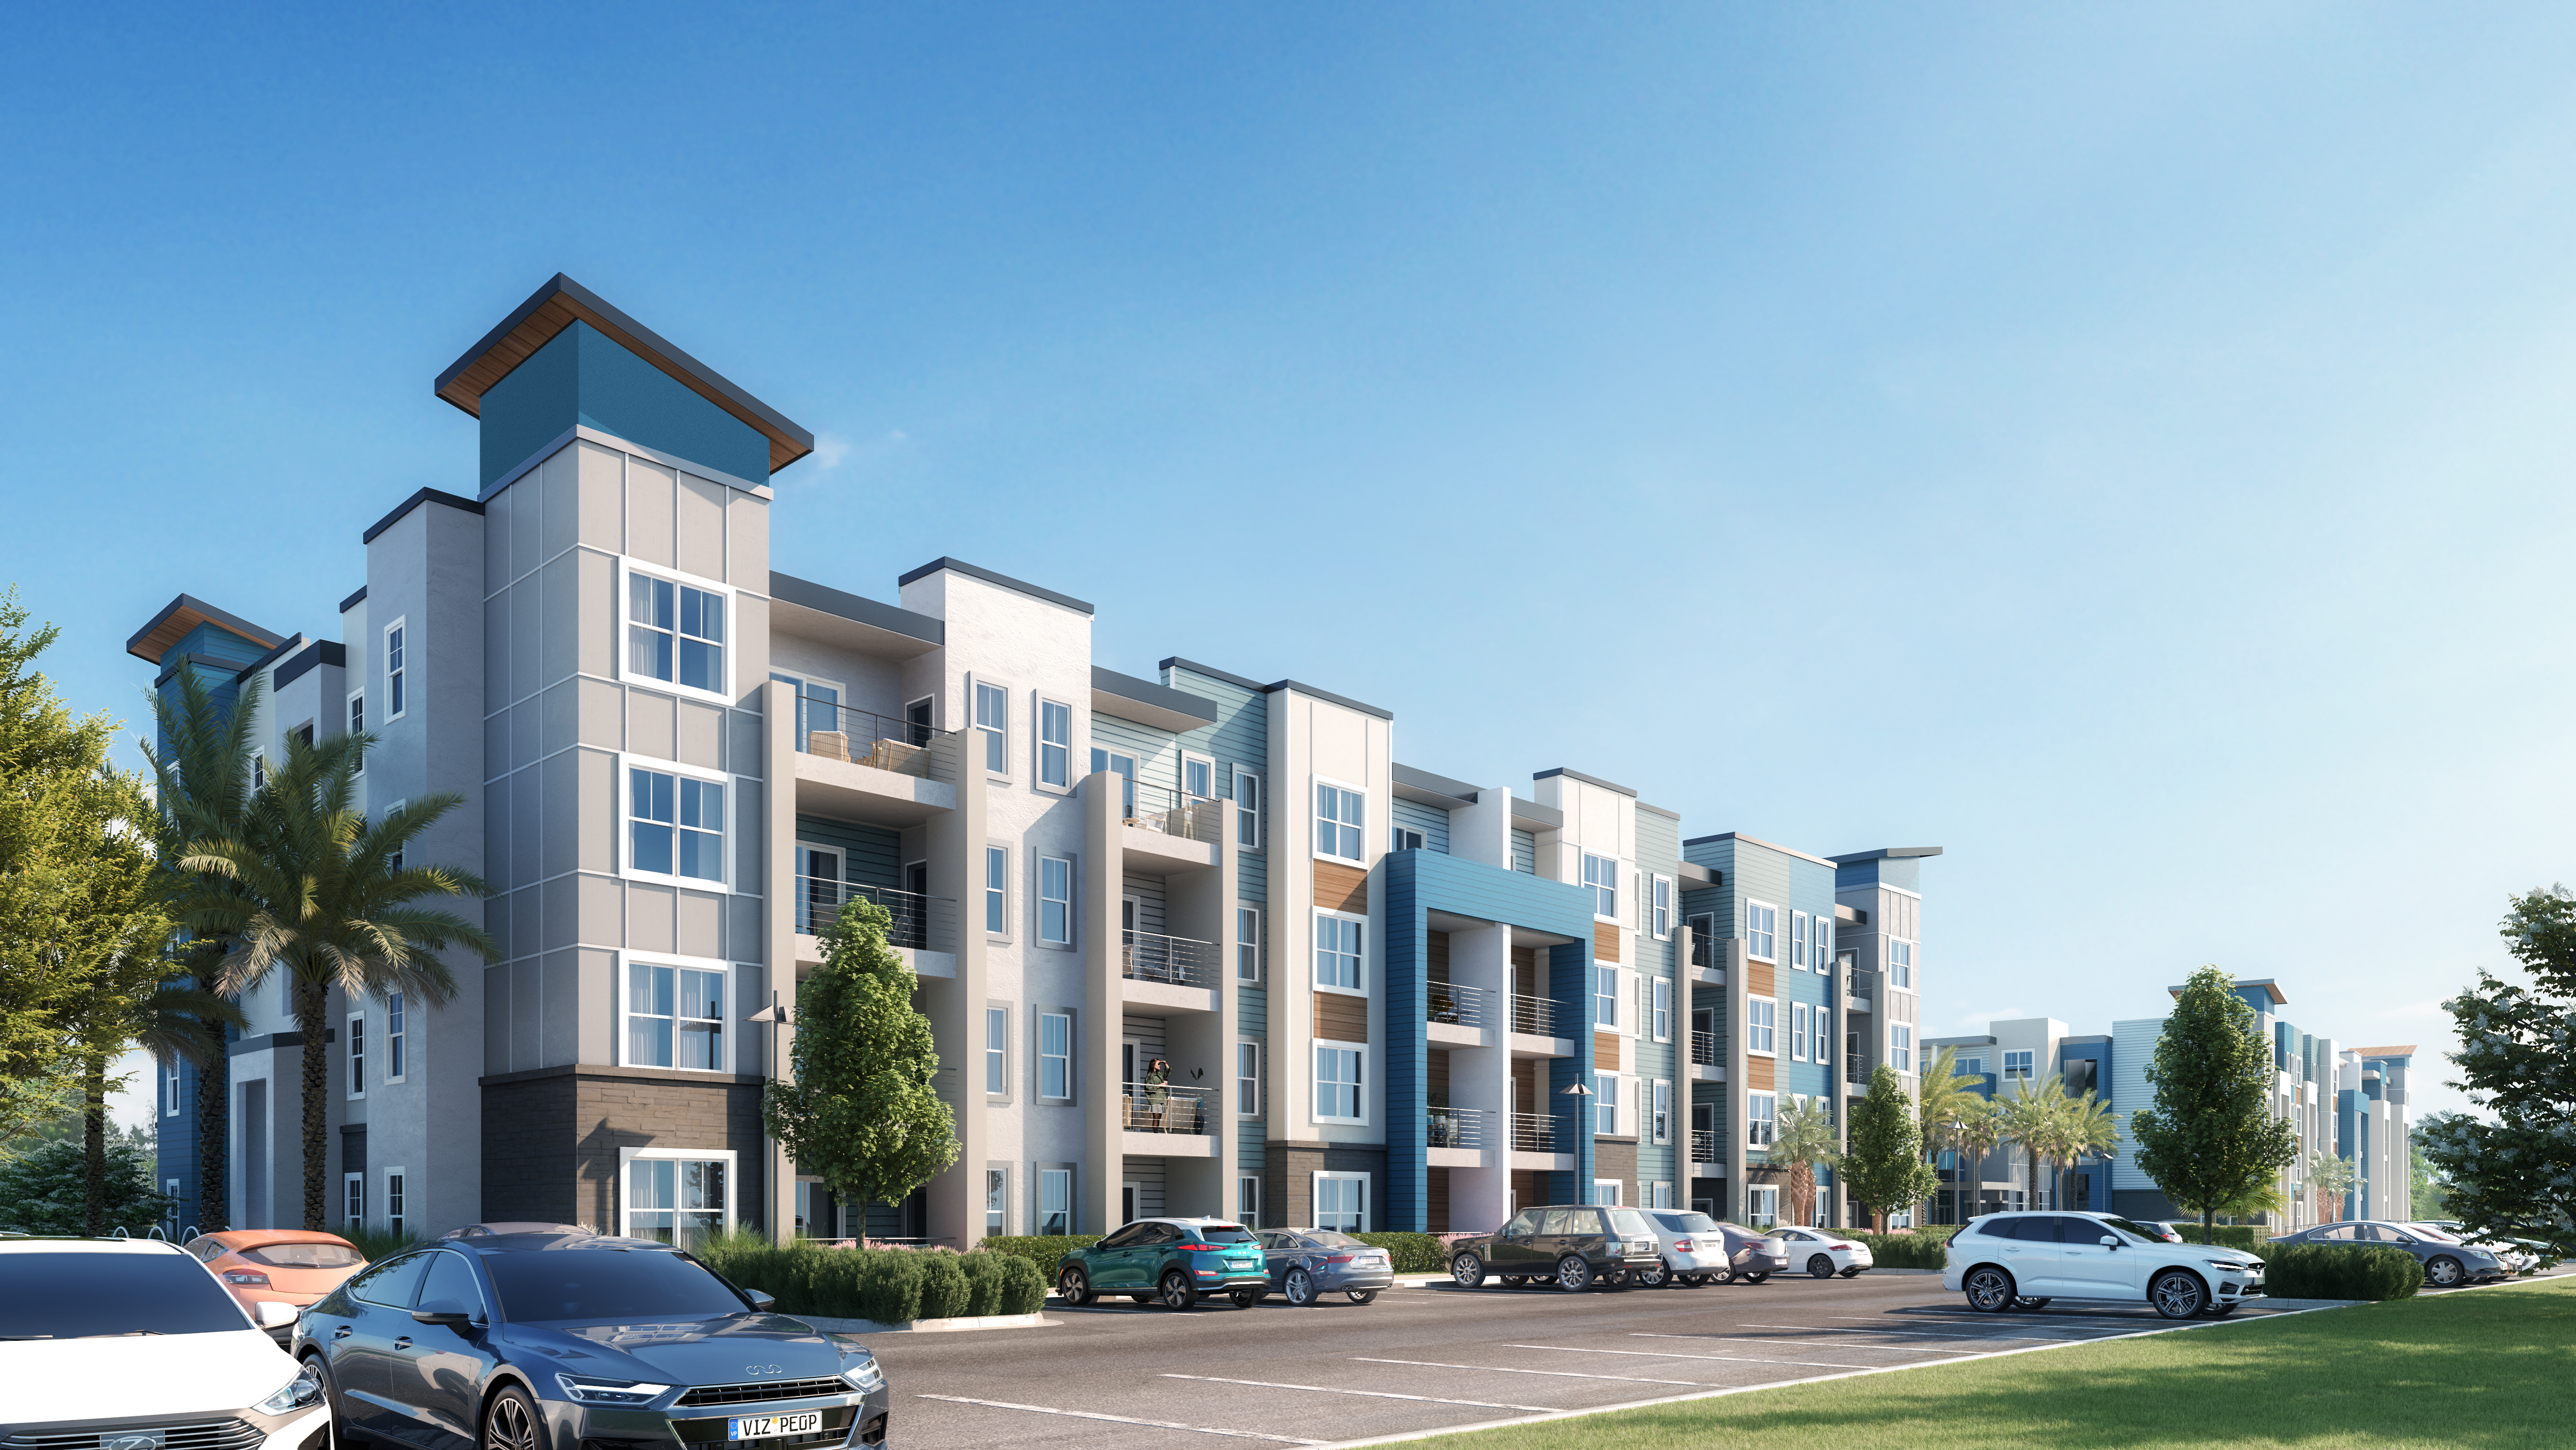 Prospect Real Estate Development Group to start construction on $39M 200-unit apartment building in Jacksonville